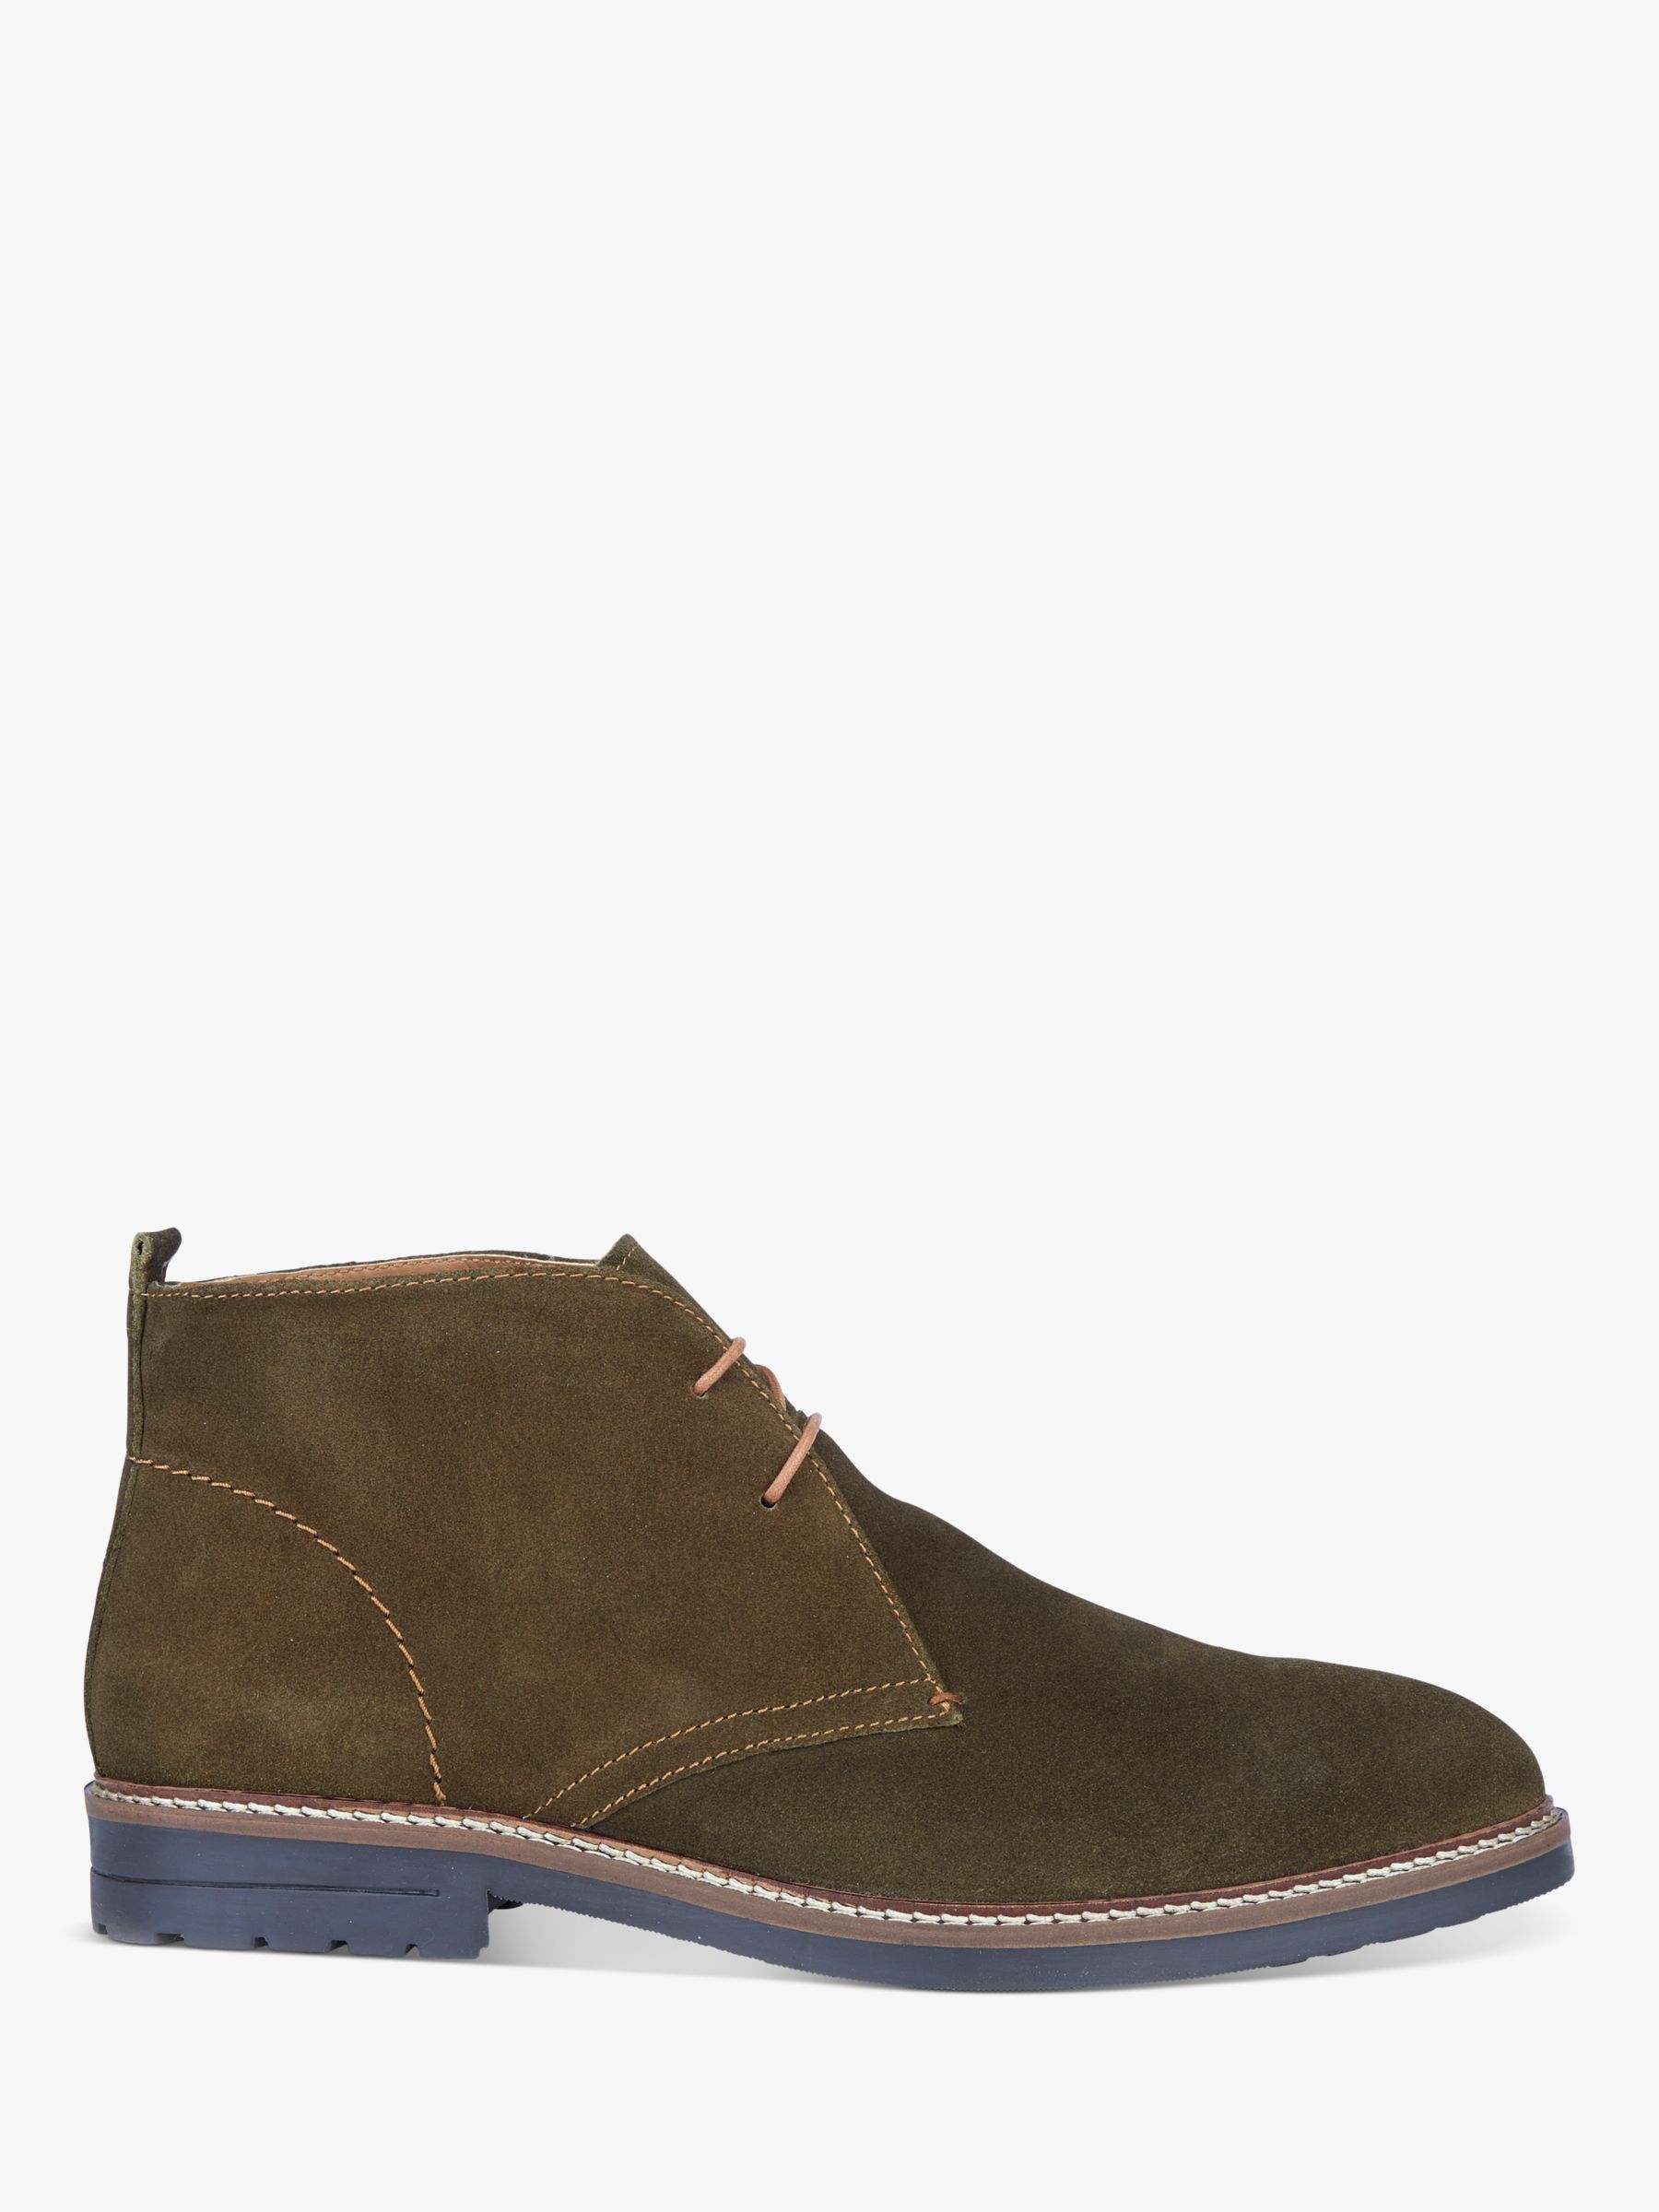 Silver Street London Wicked Suede Chukka Boots, Khaki at John Lewis ...